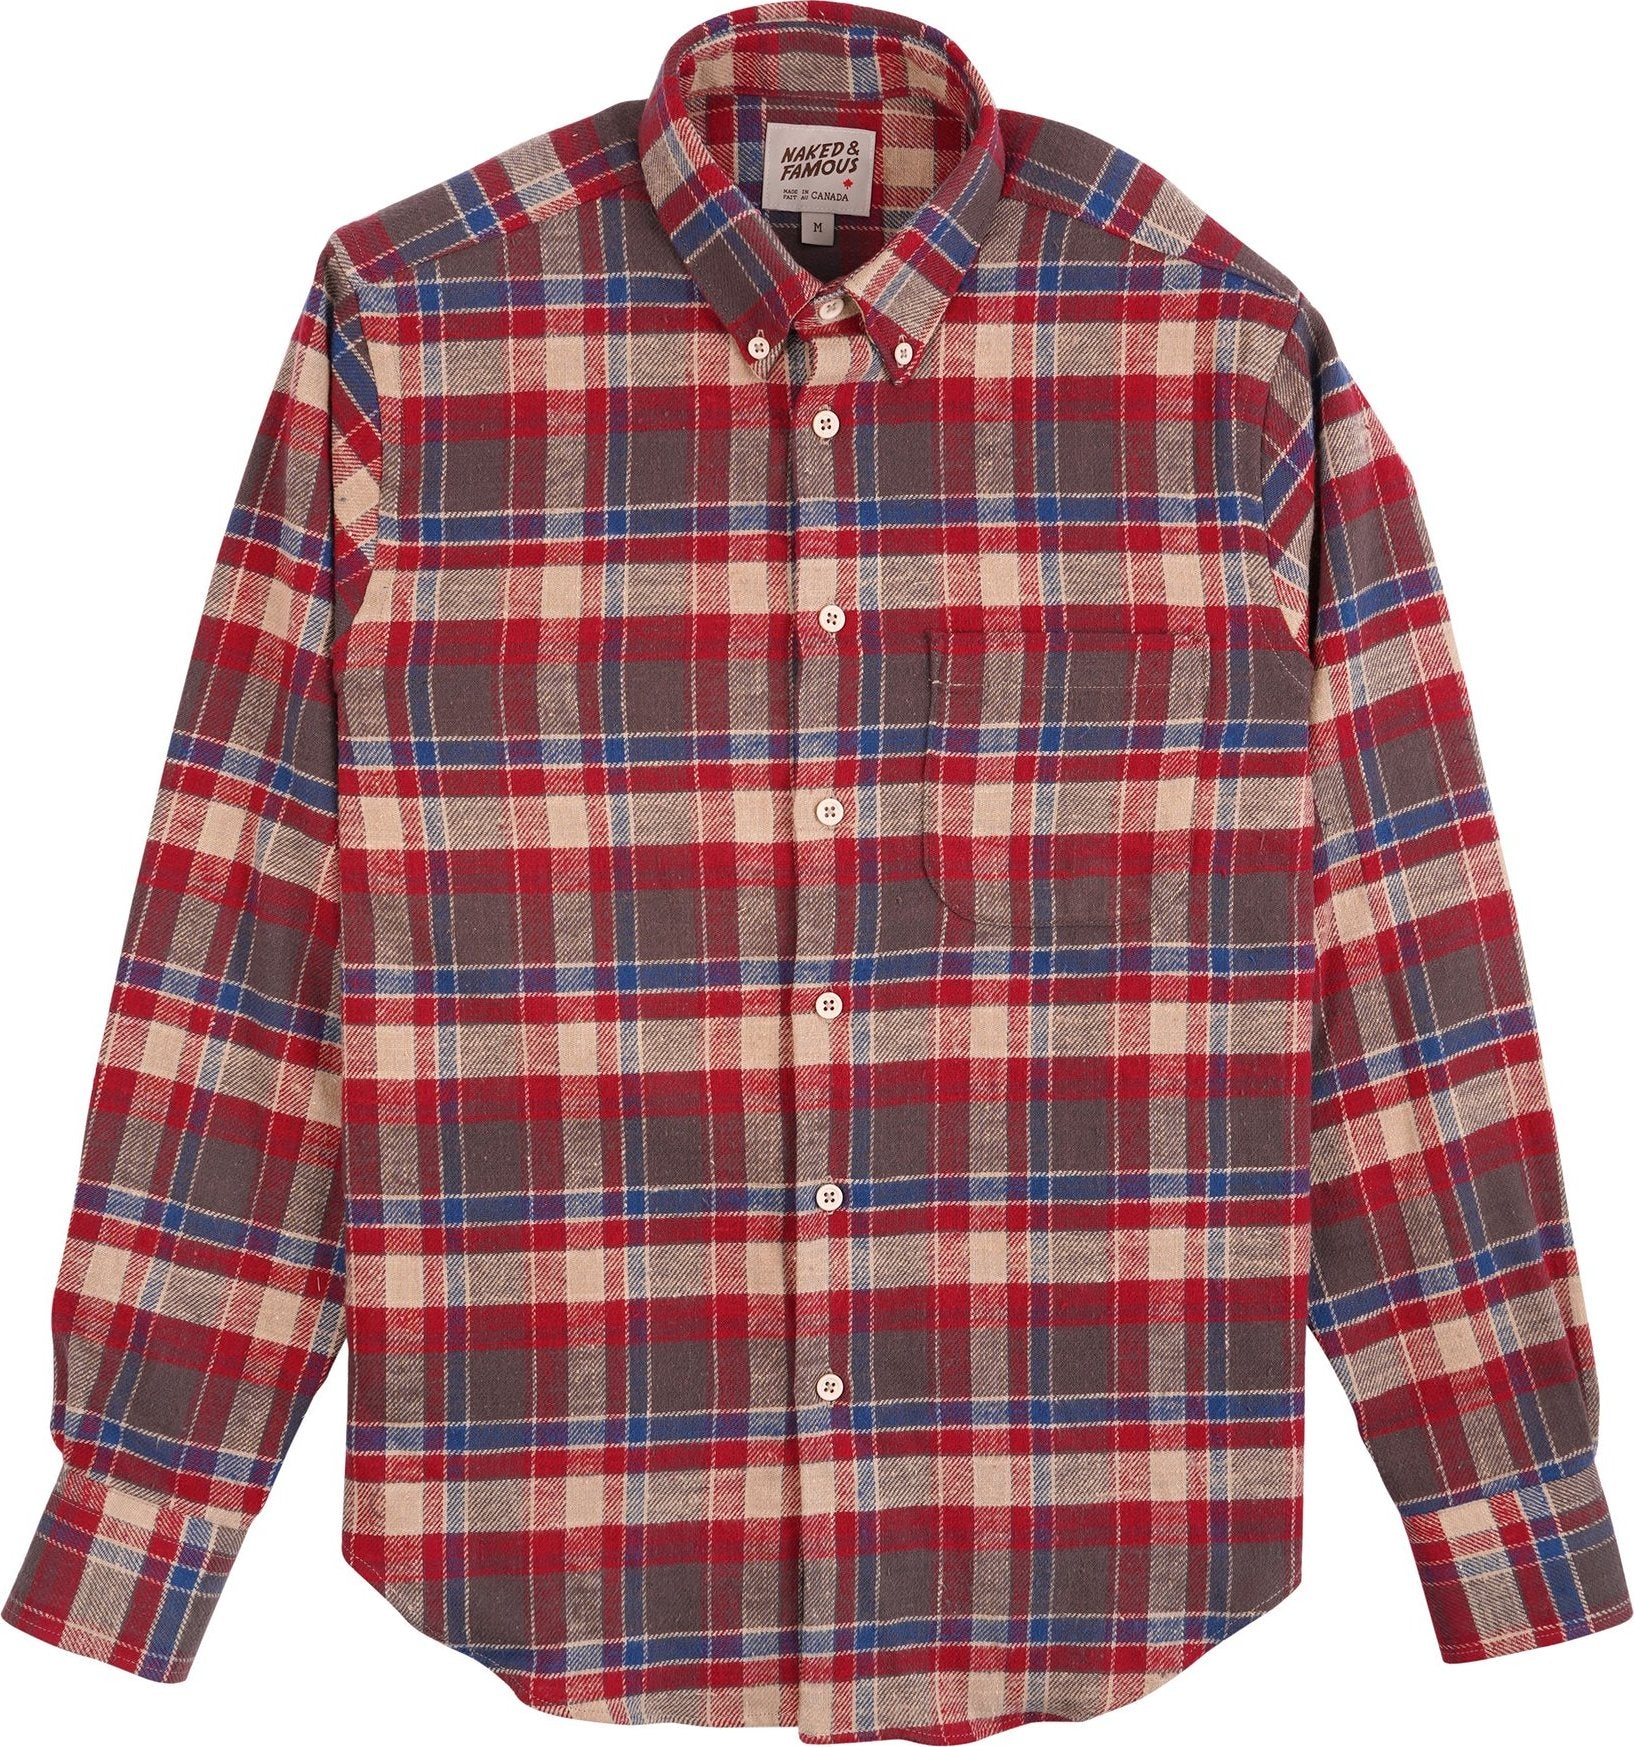 Naked & Famous Easy Shirt - Rustic Nep Flannel - Red - Men's | The Last ...